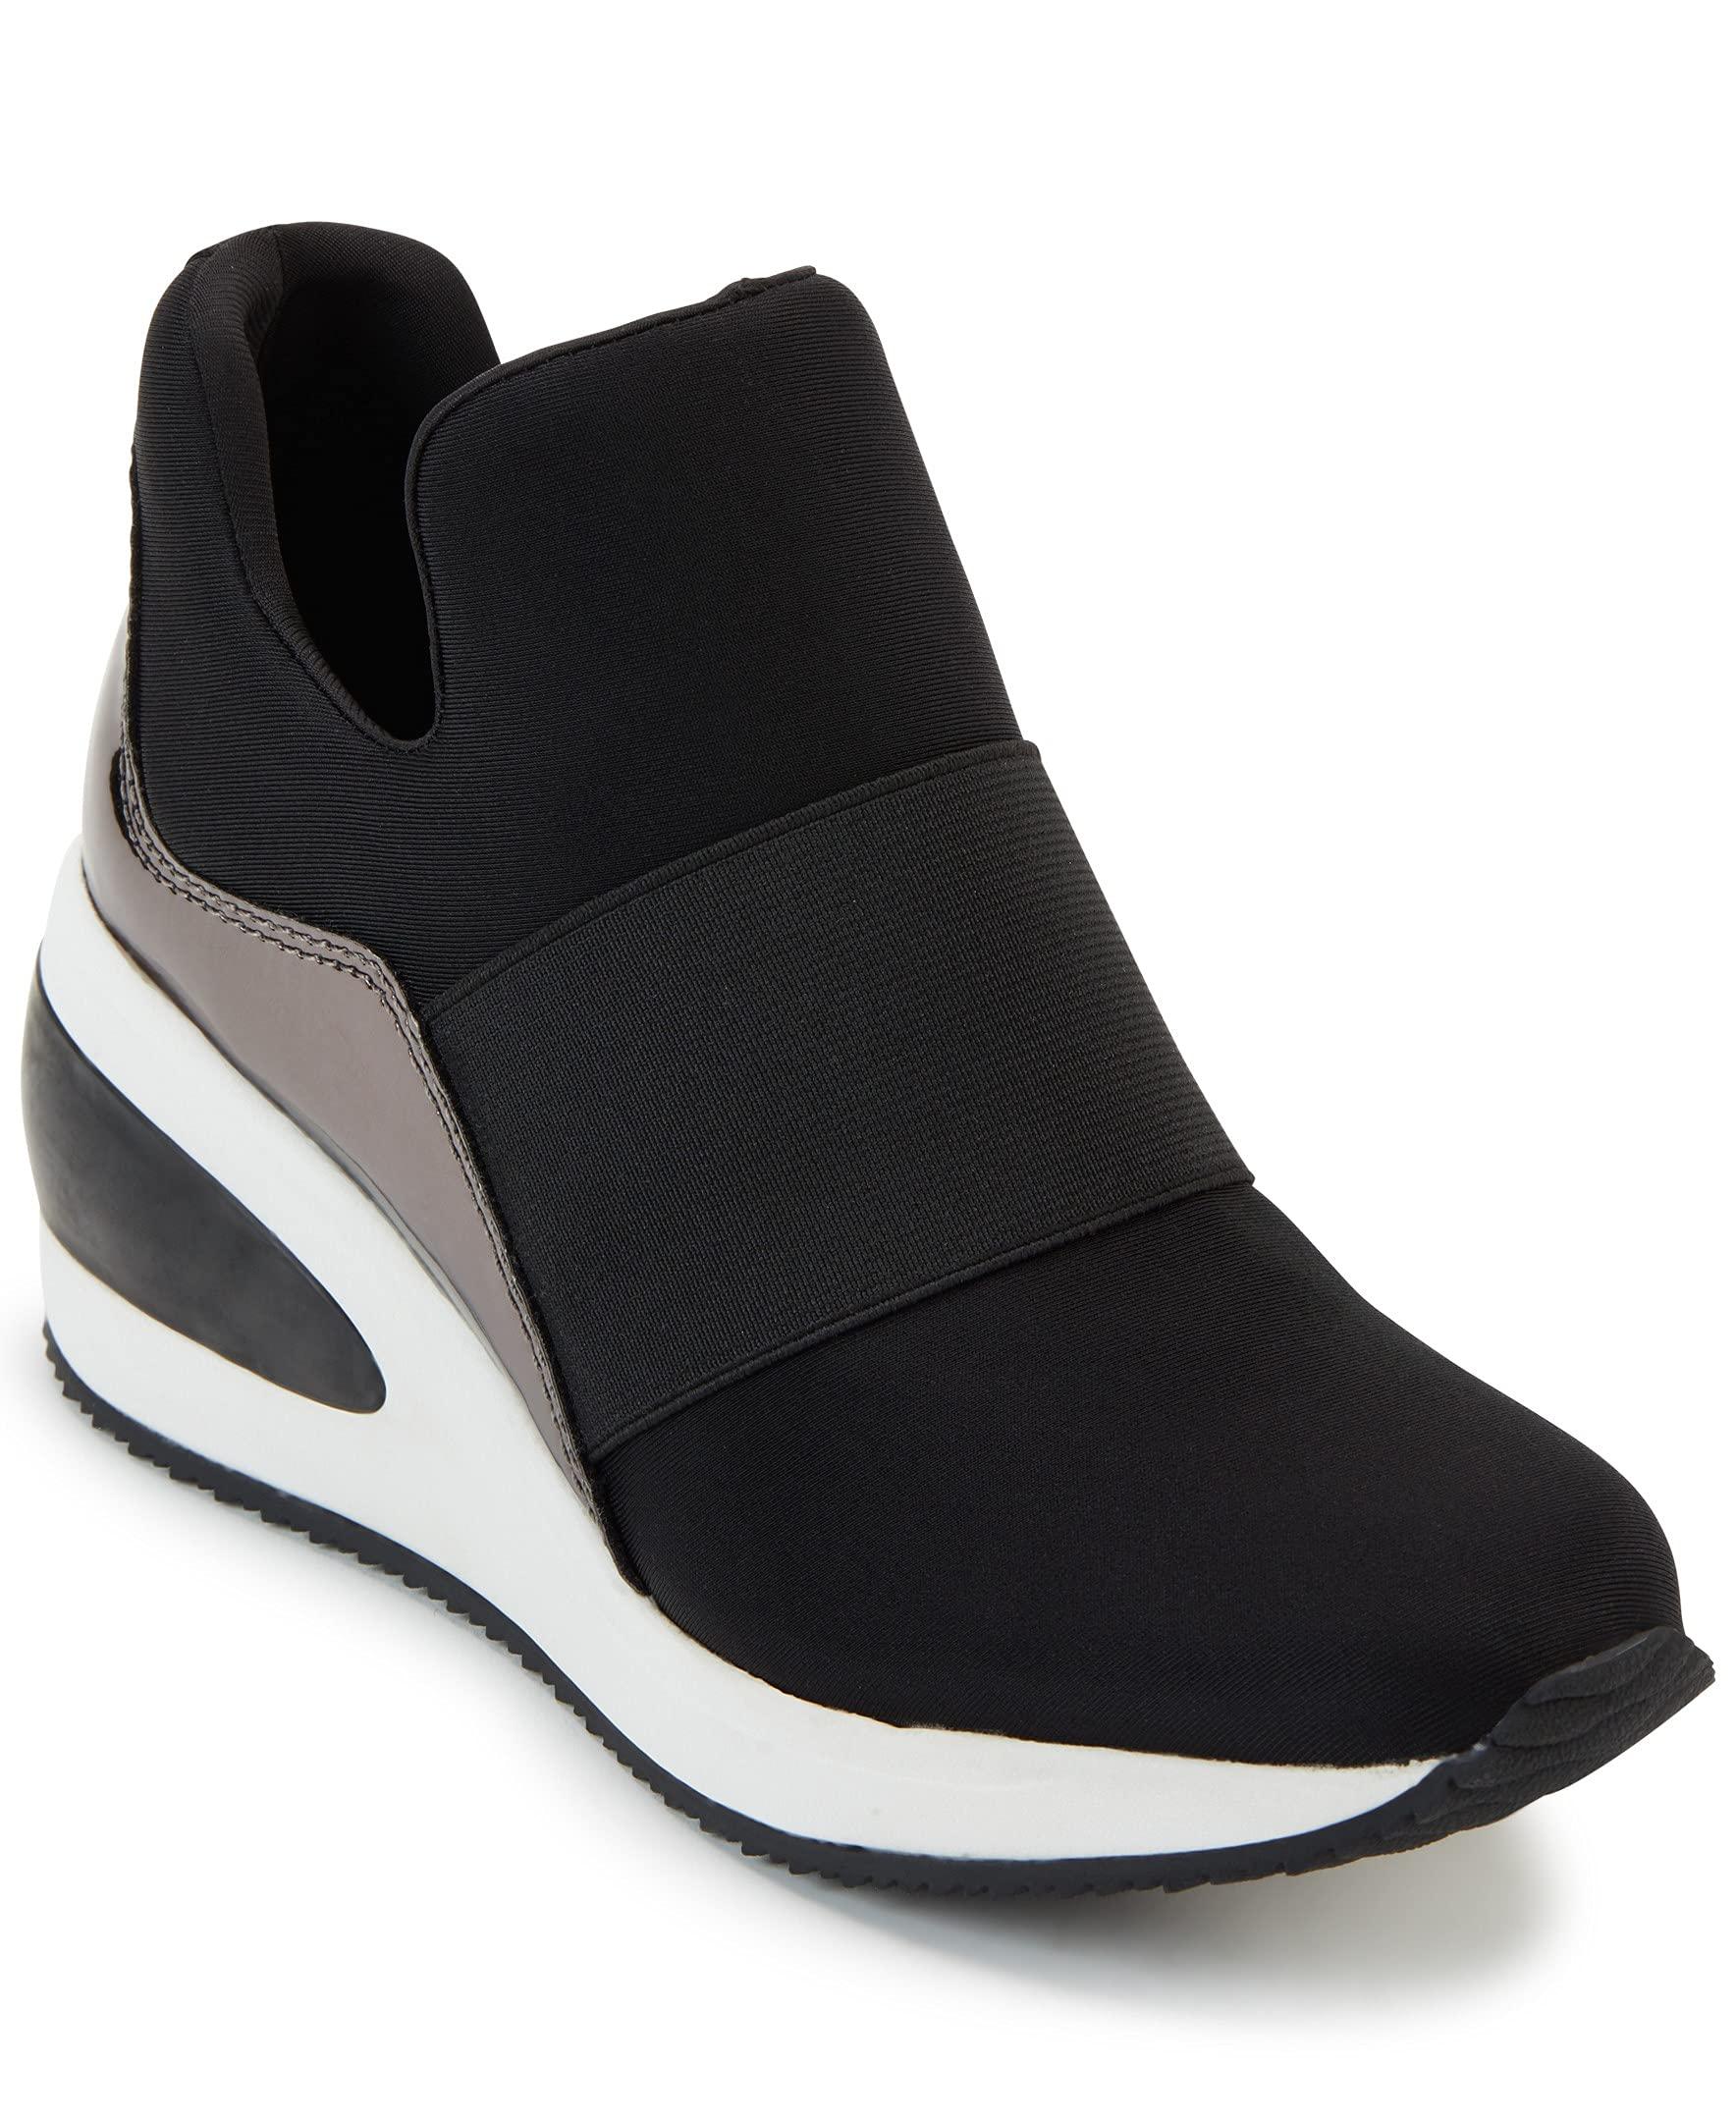 nuttet Brise ironi DKNY Borg Wedge Sneakers in Black | Lyst